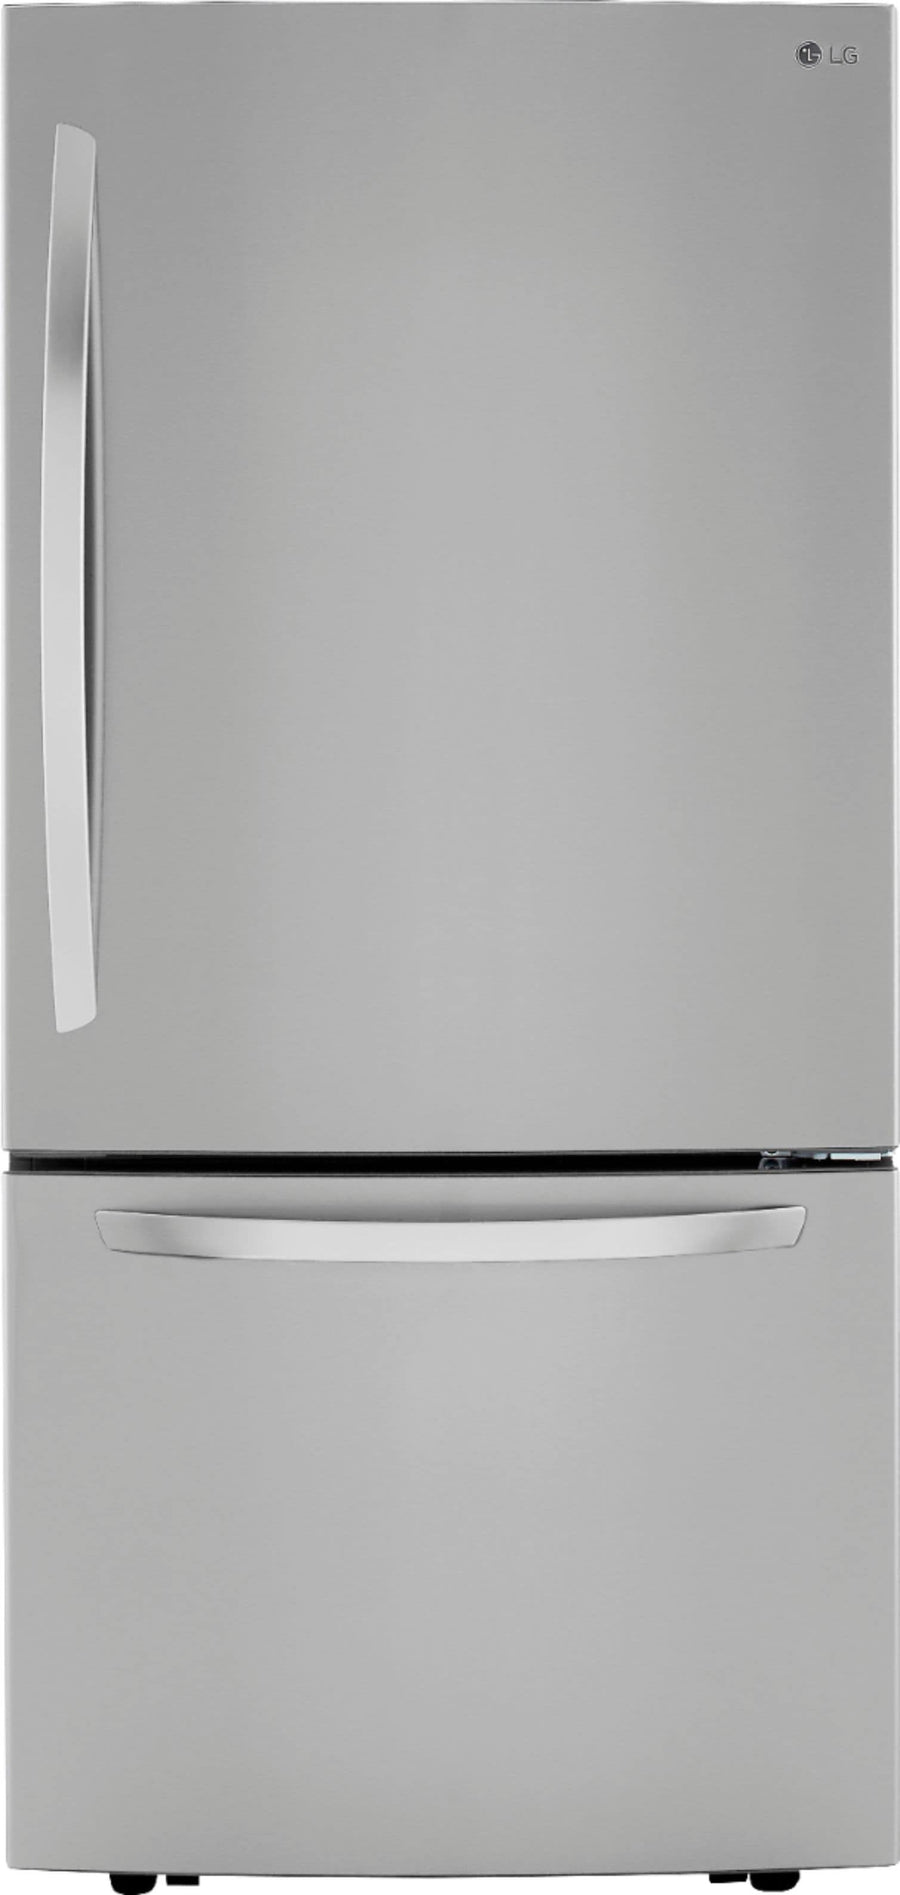 LG - 25.5 Cu. Ft. Bottom-Freezer Refrigerator with Ice Maker - Stainless steel_0